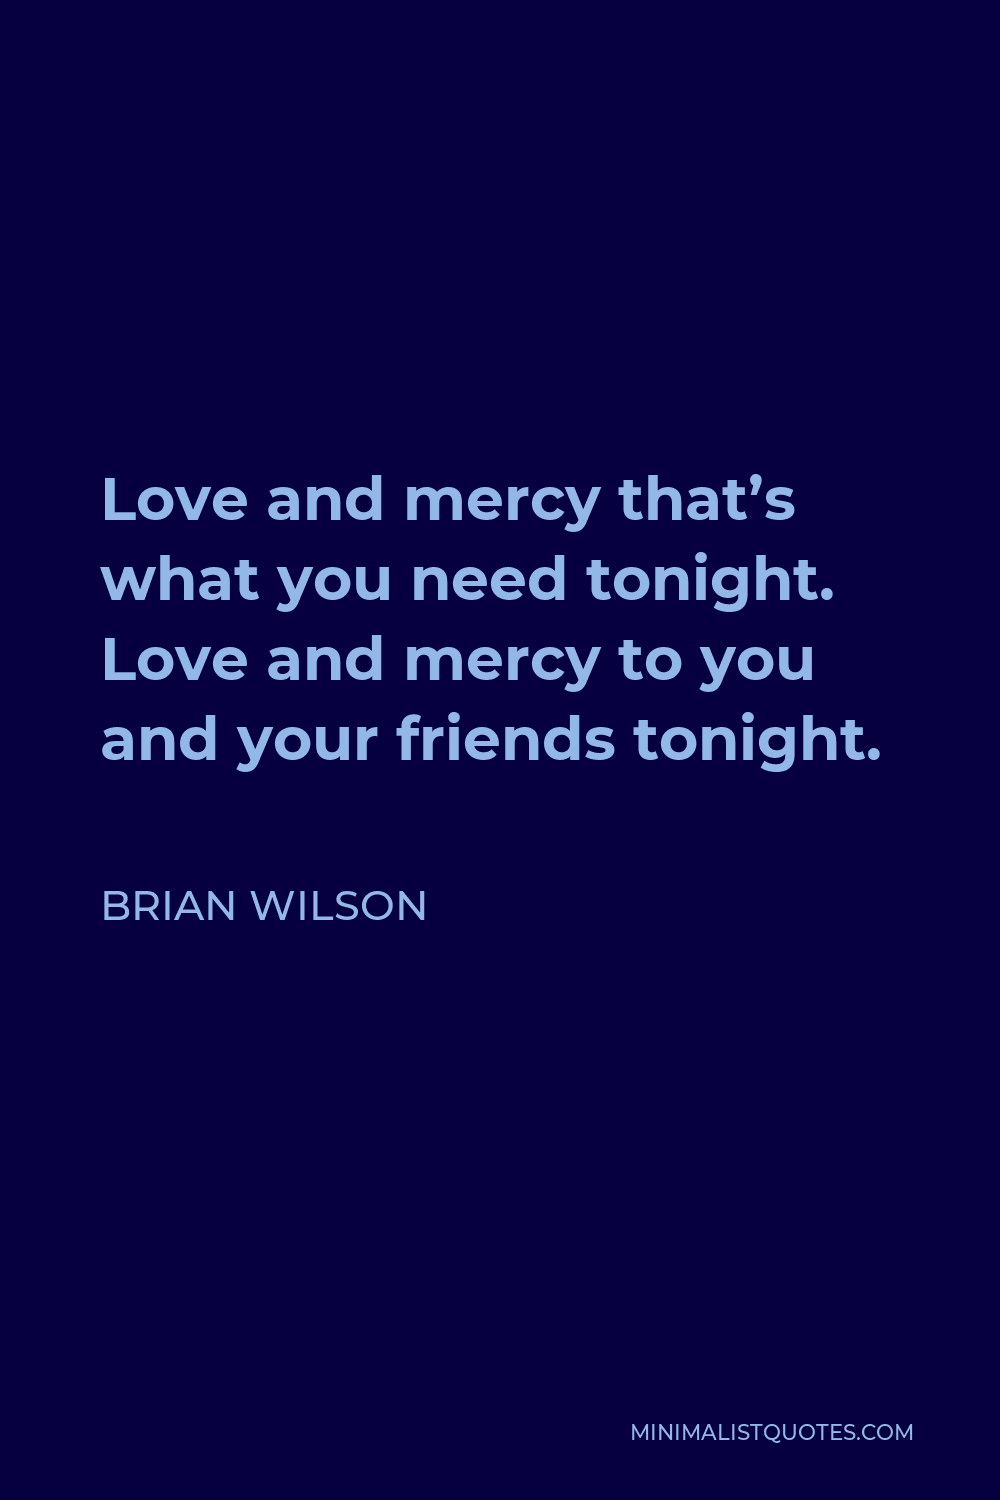 Brian Wilson Quote - Love and mercy that’s what you need tonight. Love and mercy to you and your friends tonight.